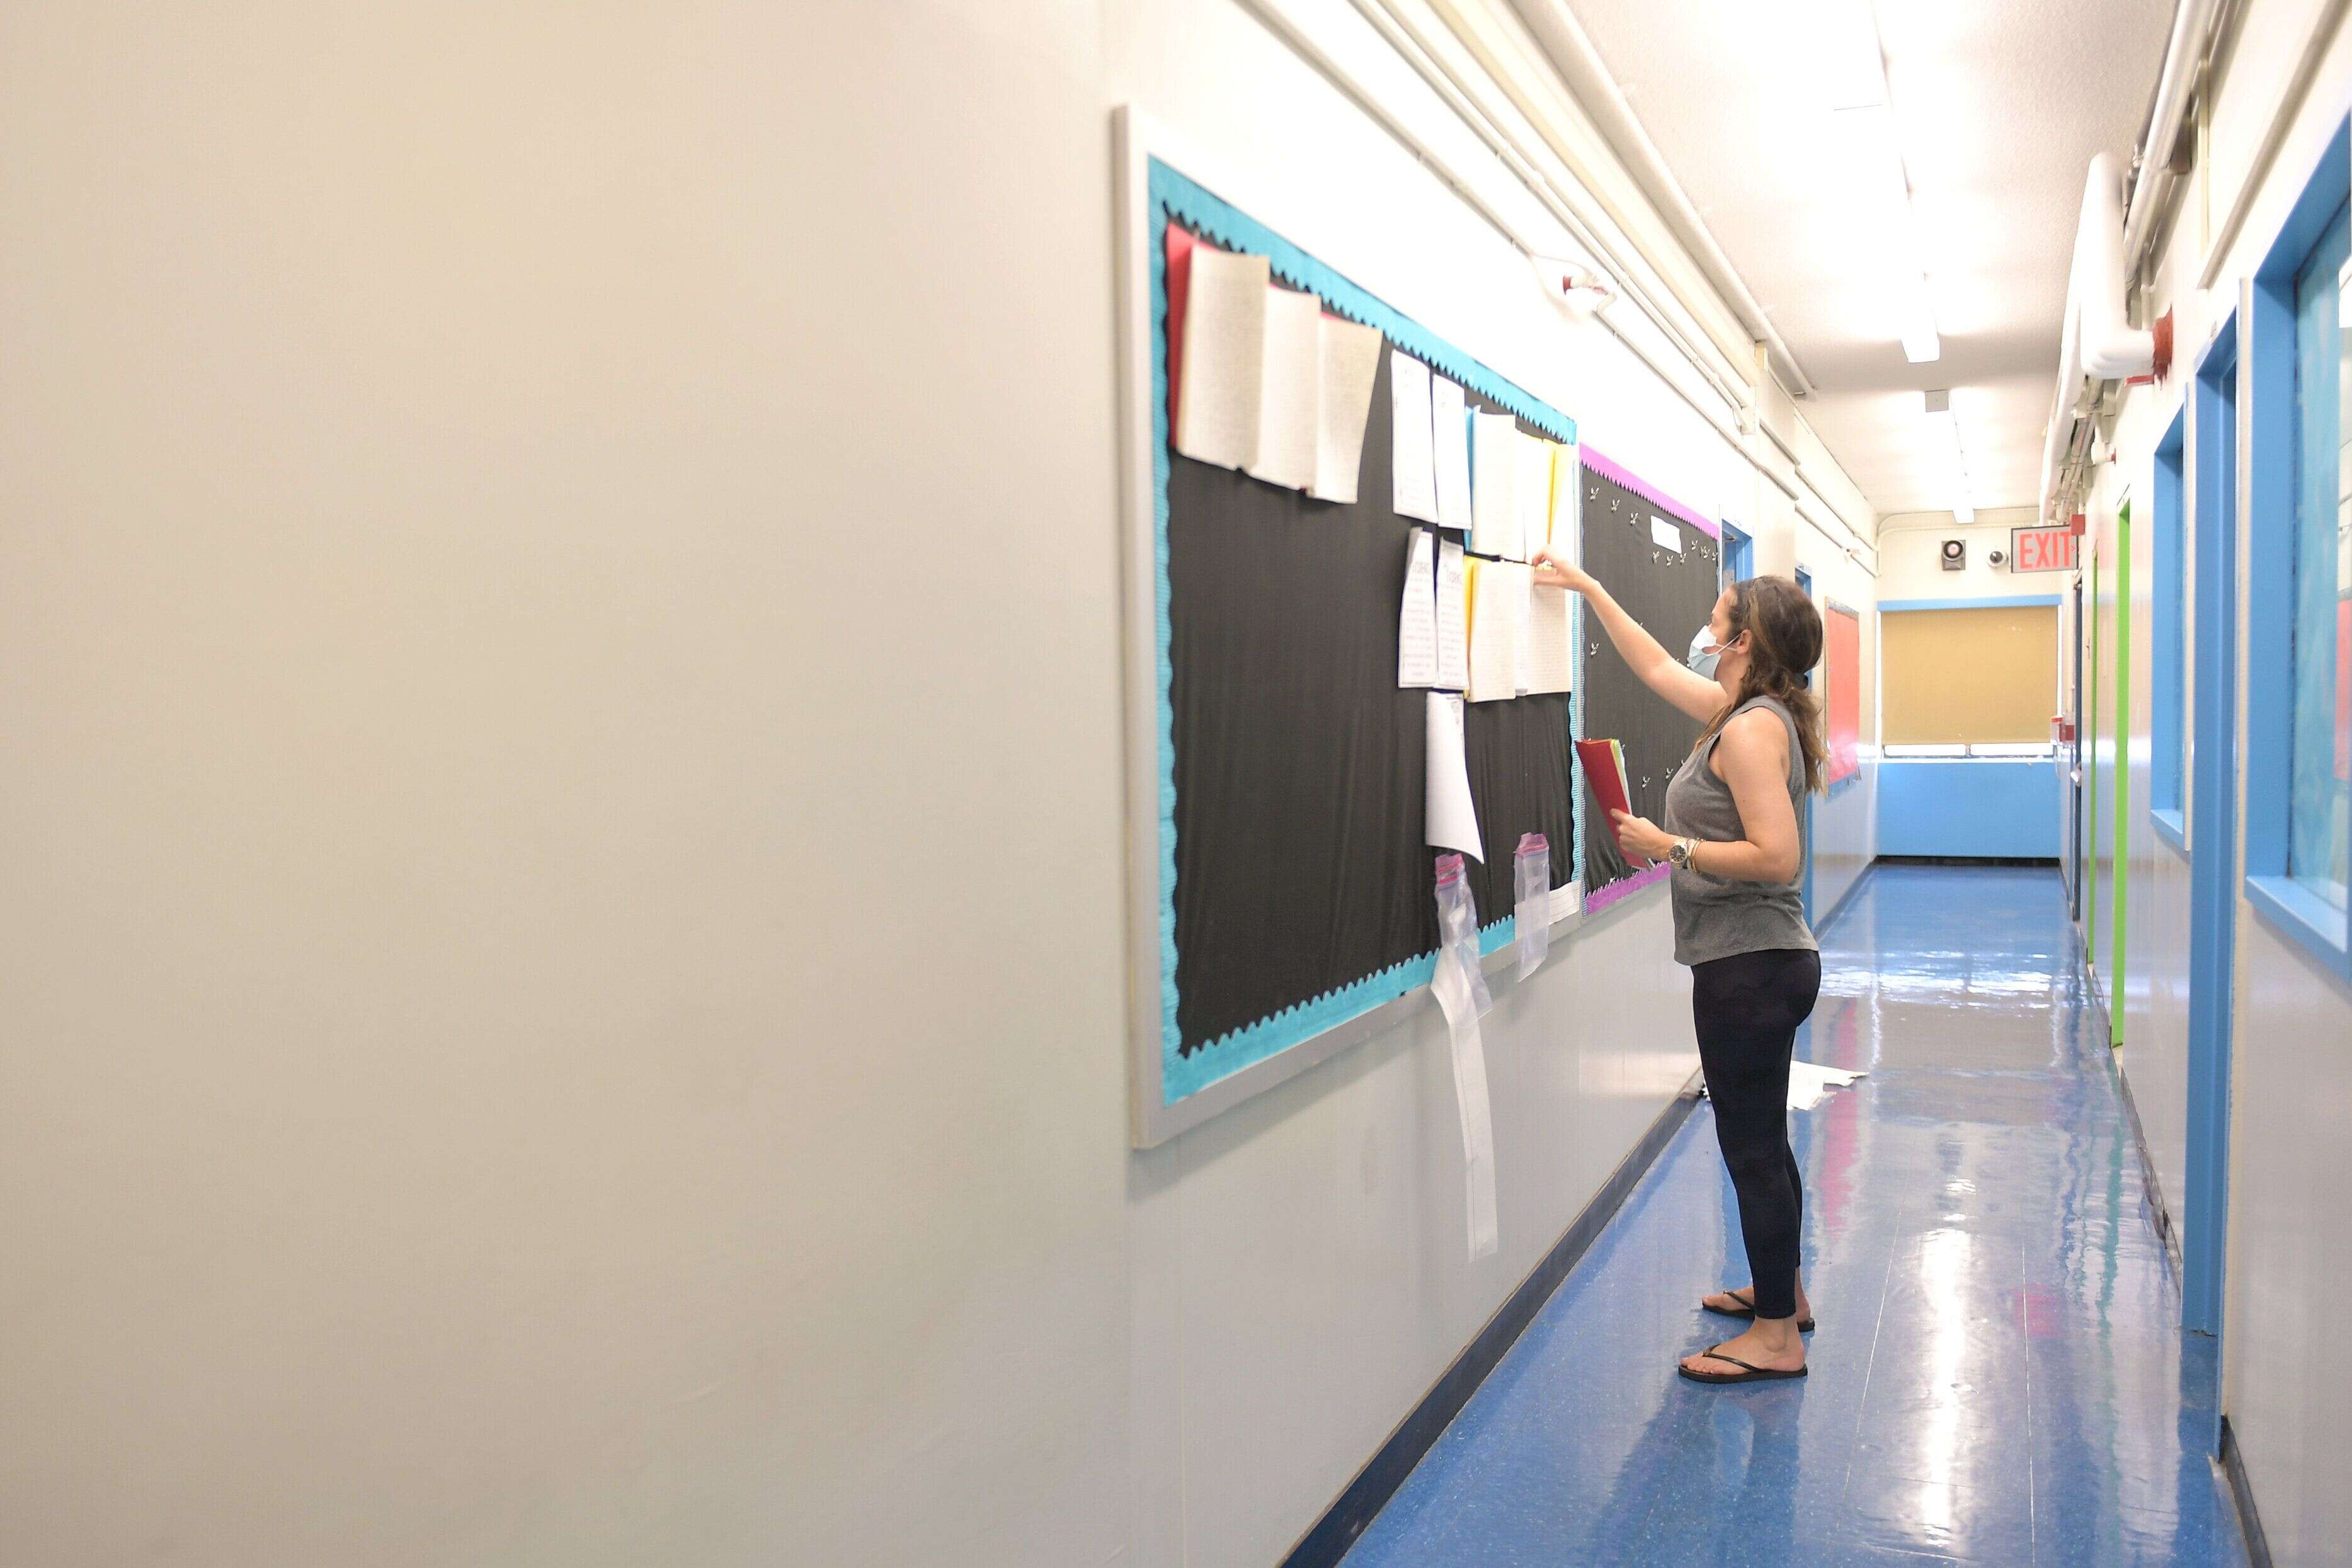 NEW YORK, NEW YORK - AUGUST 25: Teacher Marisa Wiezel, who is related to the photographer, removes student assignments which remained posted outside her classroom from the 2019/2020 school year at Yung Wing School P.S. 124 on August 25, 2020 in New York City. New York City public schools are scheduled to start September 10 with new guidelines in place for how they will operate.  (Photo by Michael Loccisano/Getty Images)